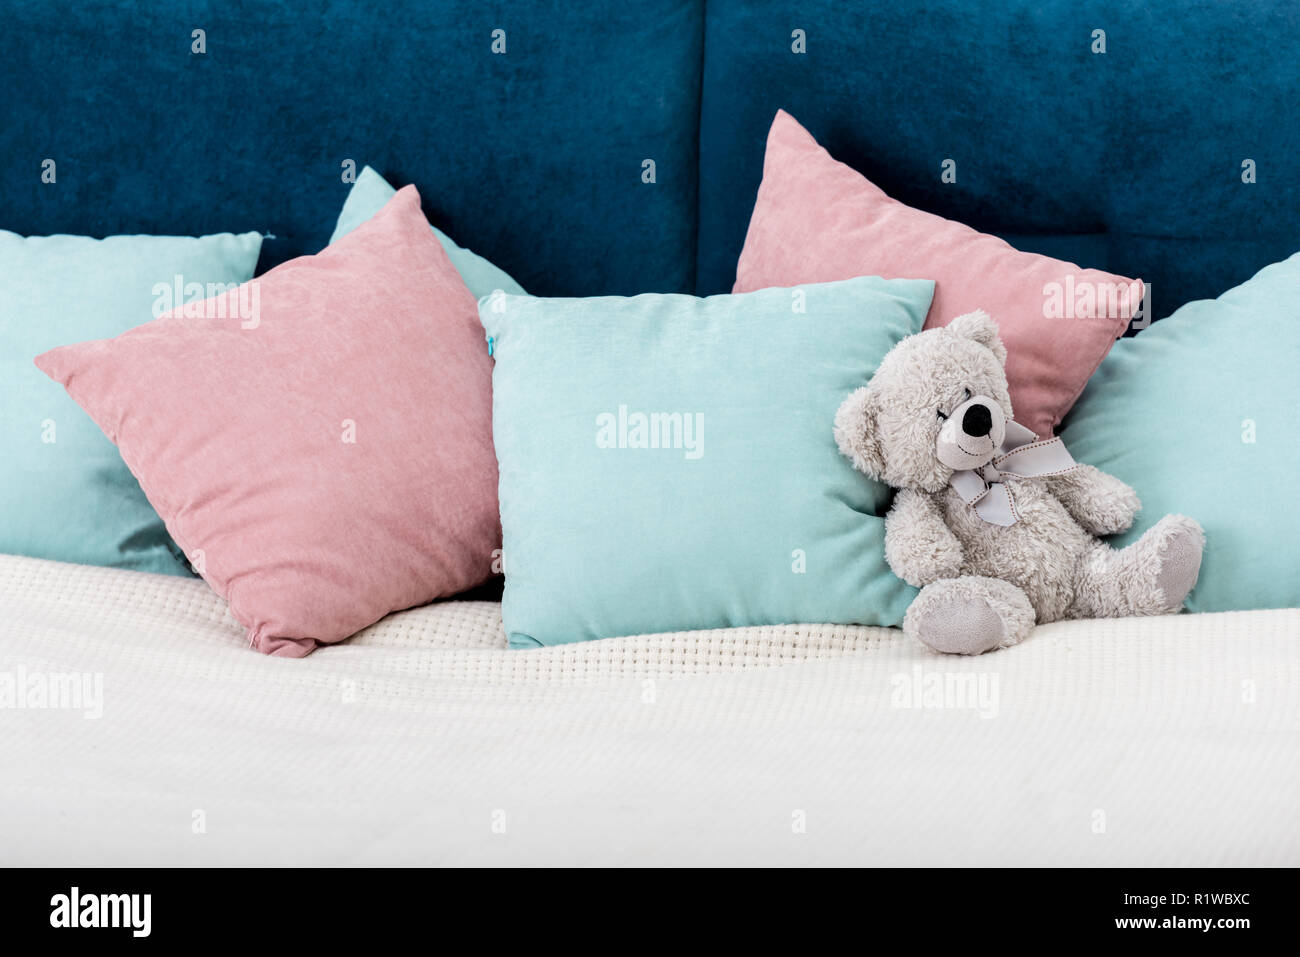 teddy bear laying on the bed with pillows on background Stock Photo